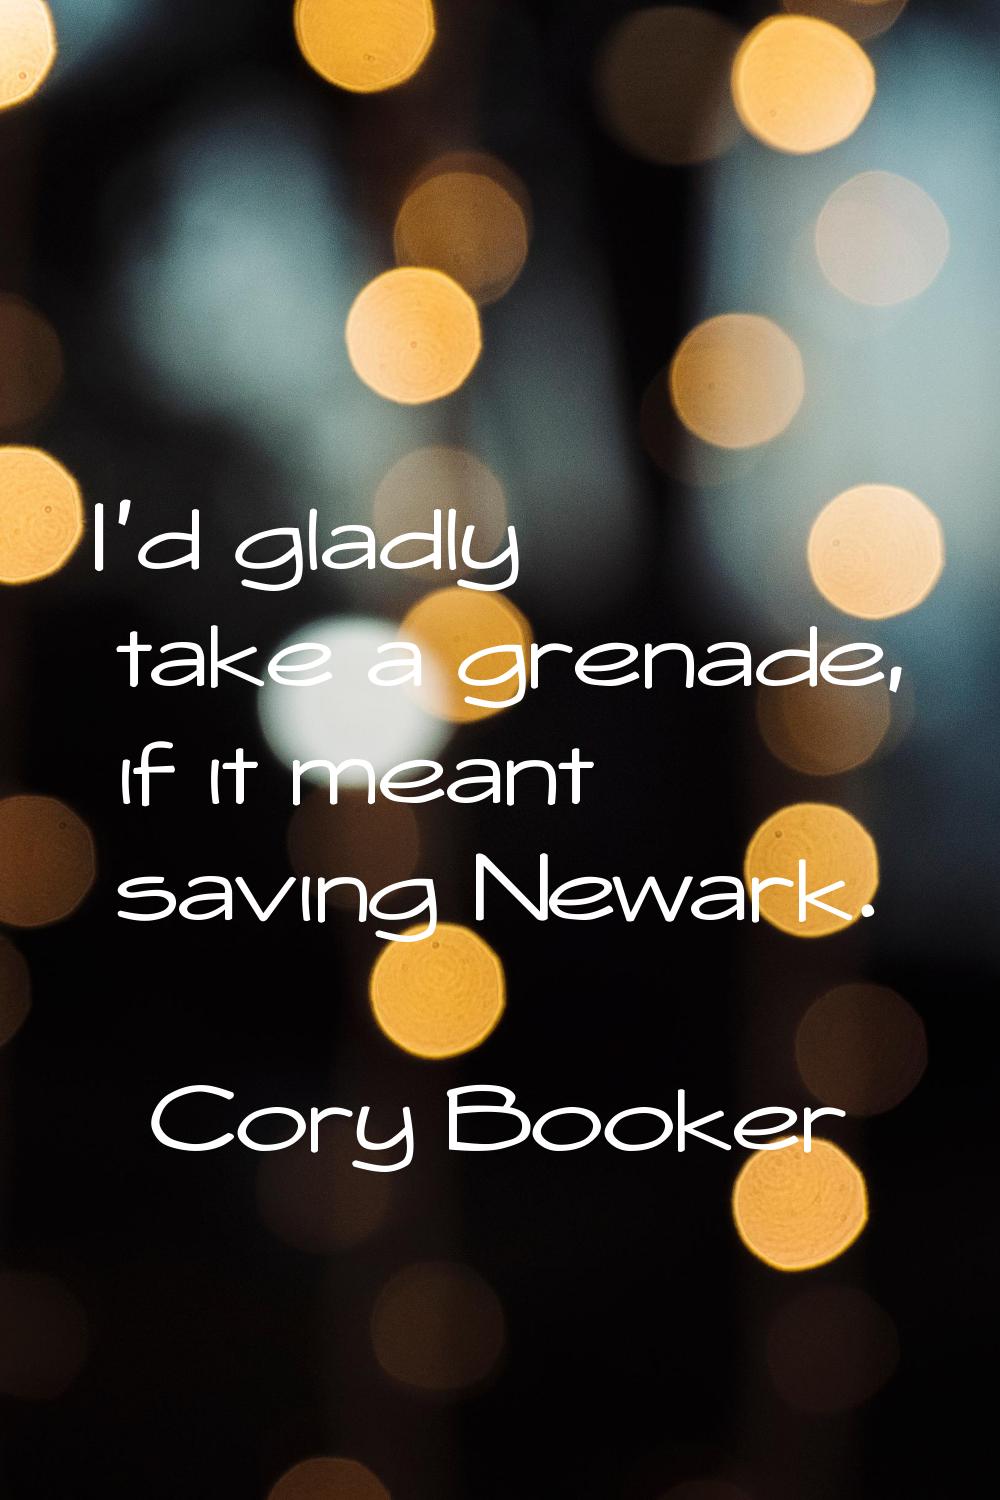 I'd gladly take a grenade, if it meant saving Newark.